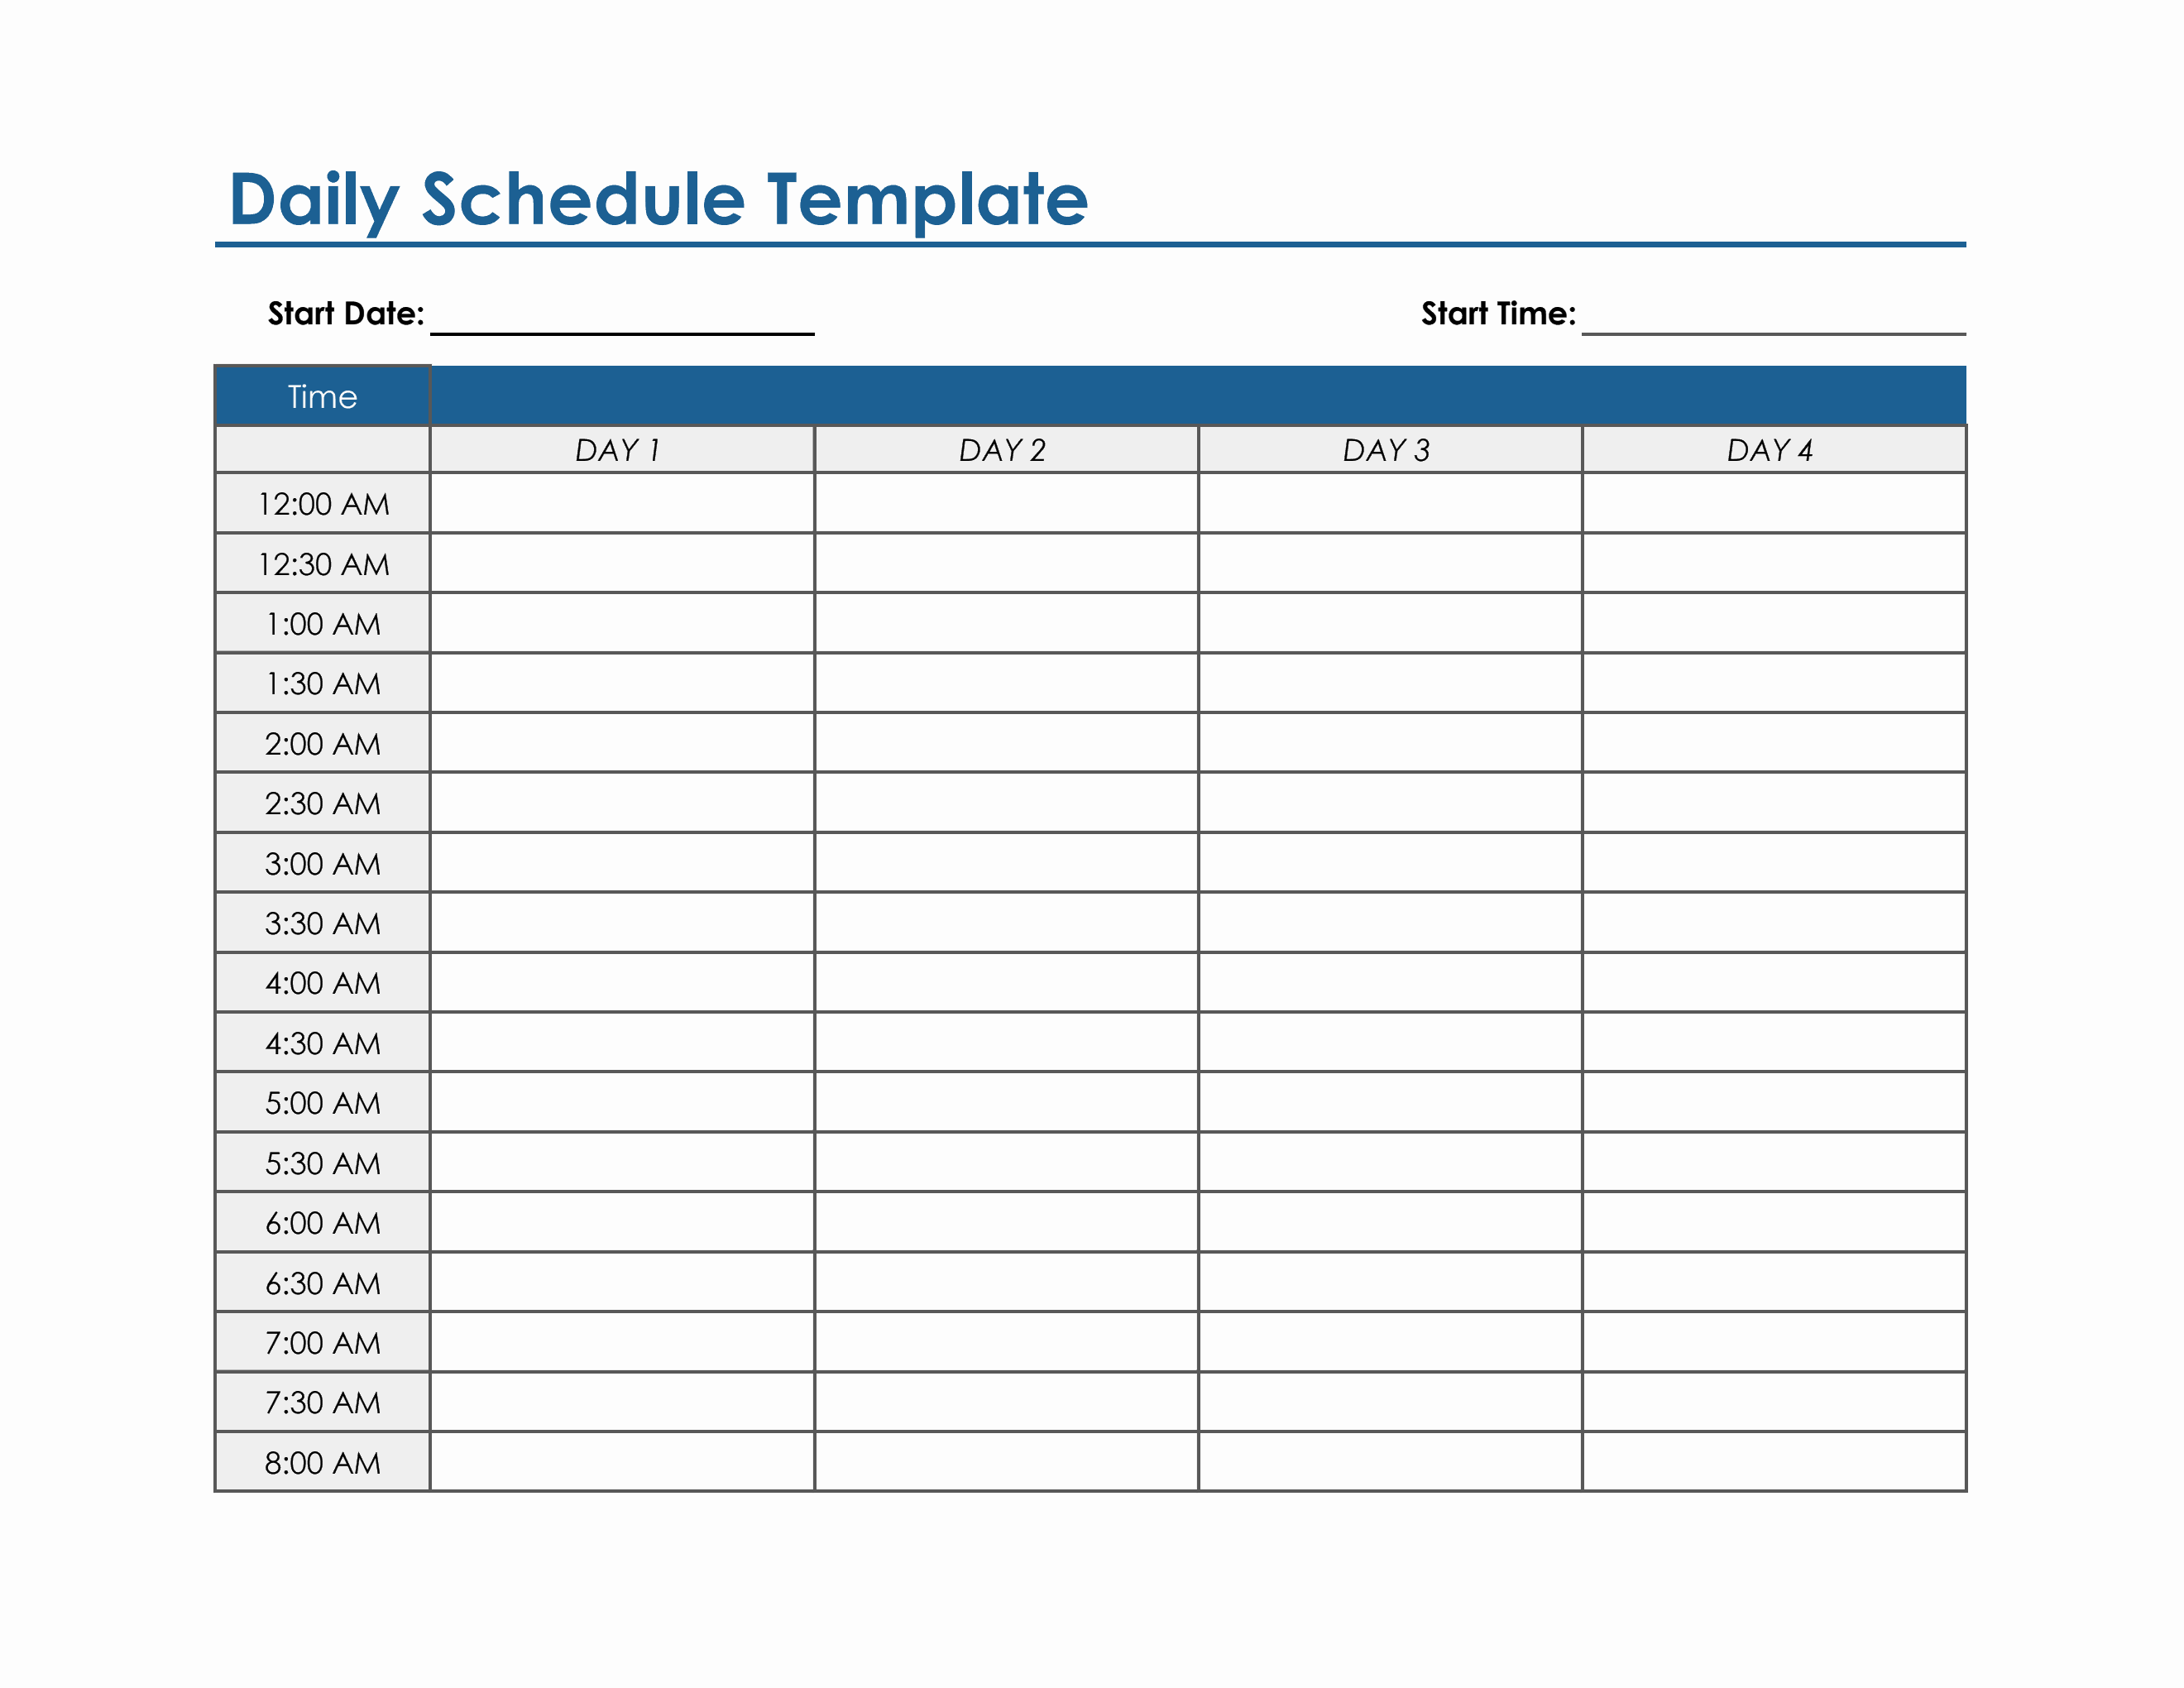 Timing Schedule Template